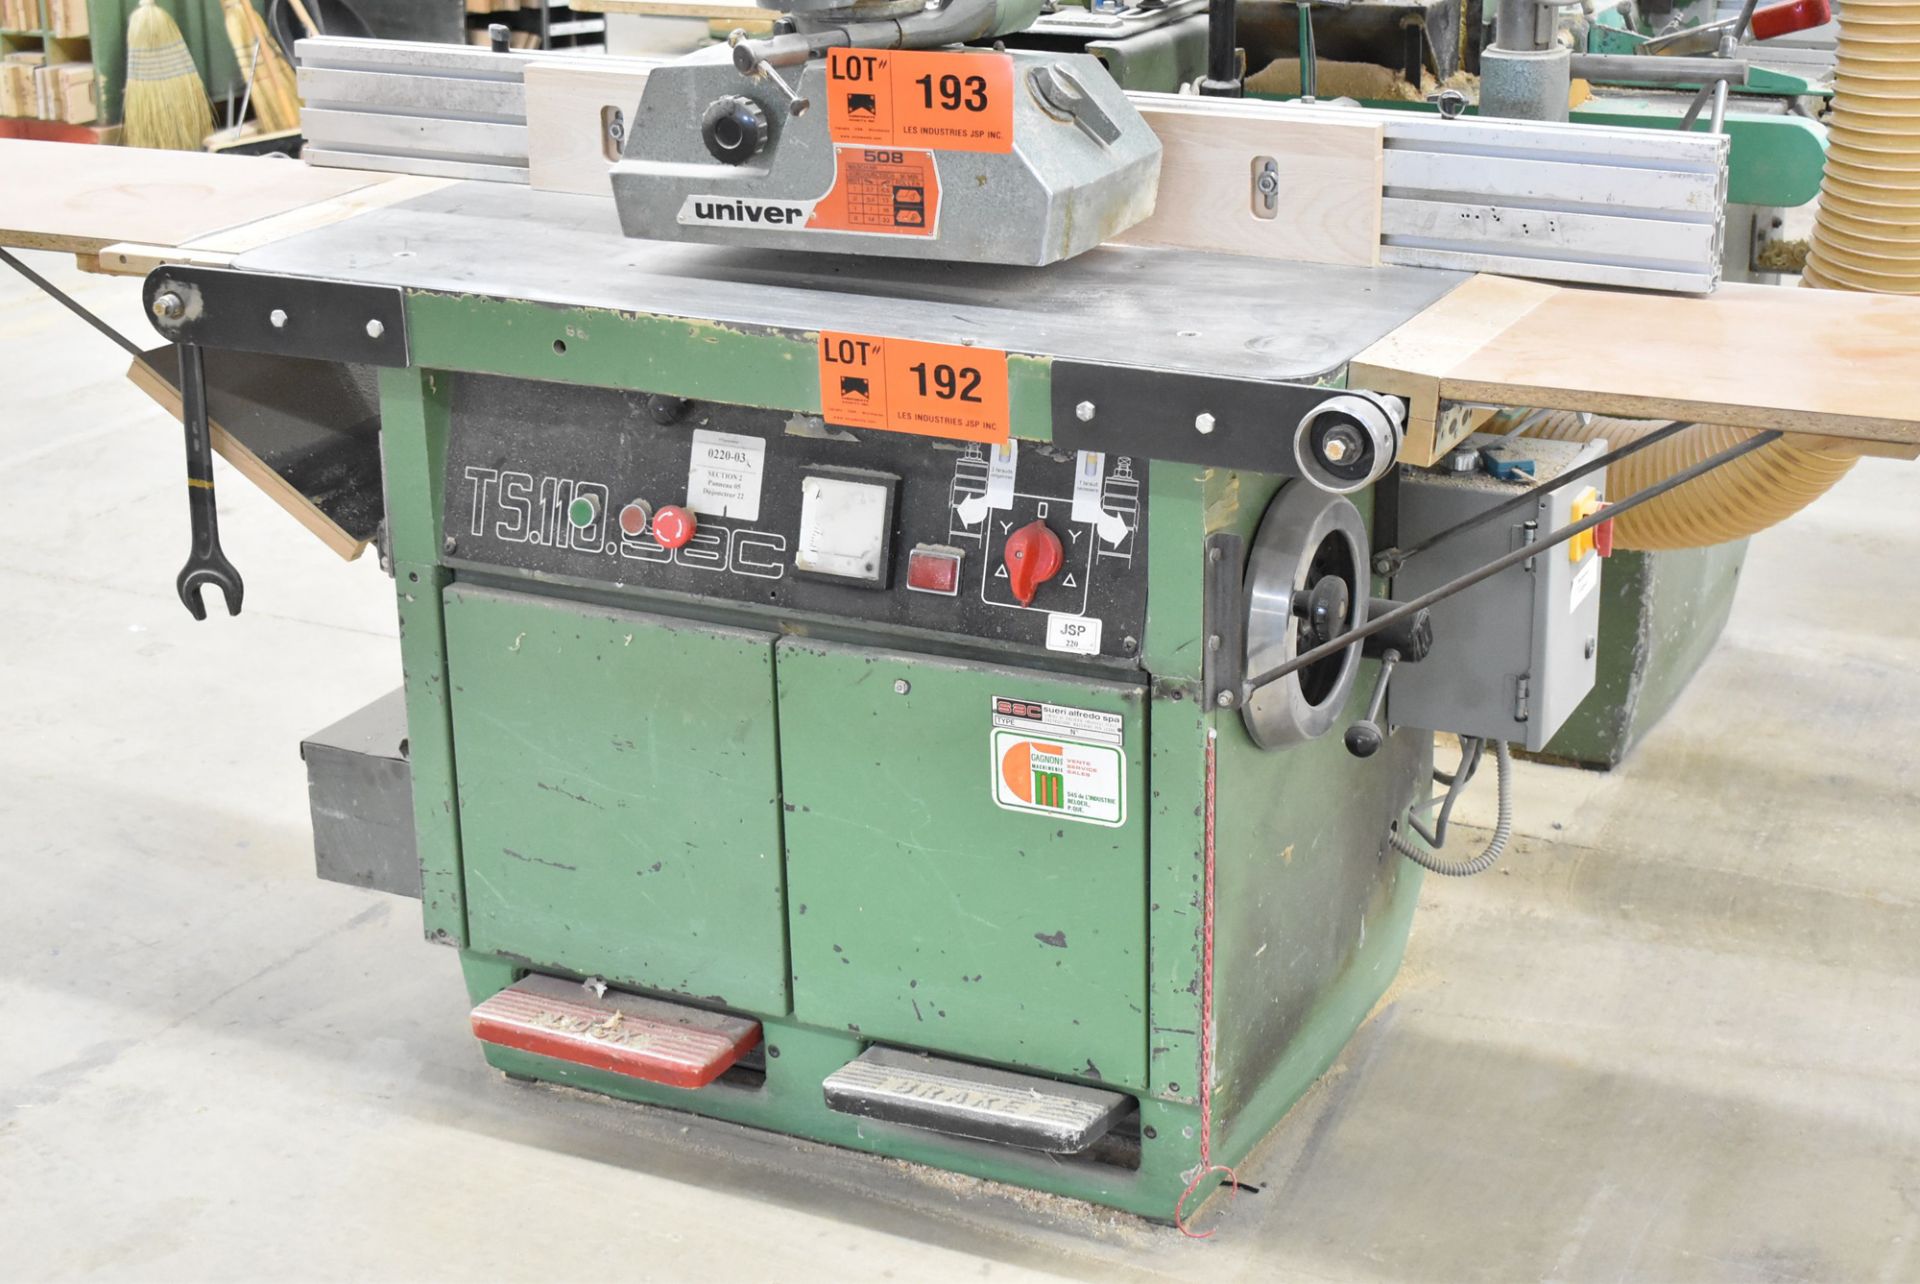 SAC TS-110 SHAPER WITH 2" DIA. SPINDLE, SPEEDS TO 10,000 RPM, 43" X 35" TABLE, APPROX. 10 HP, S/N: - Image 2 of 4